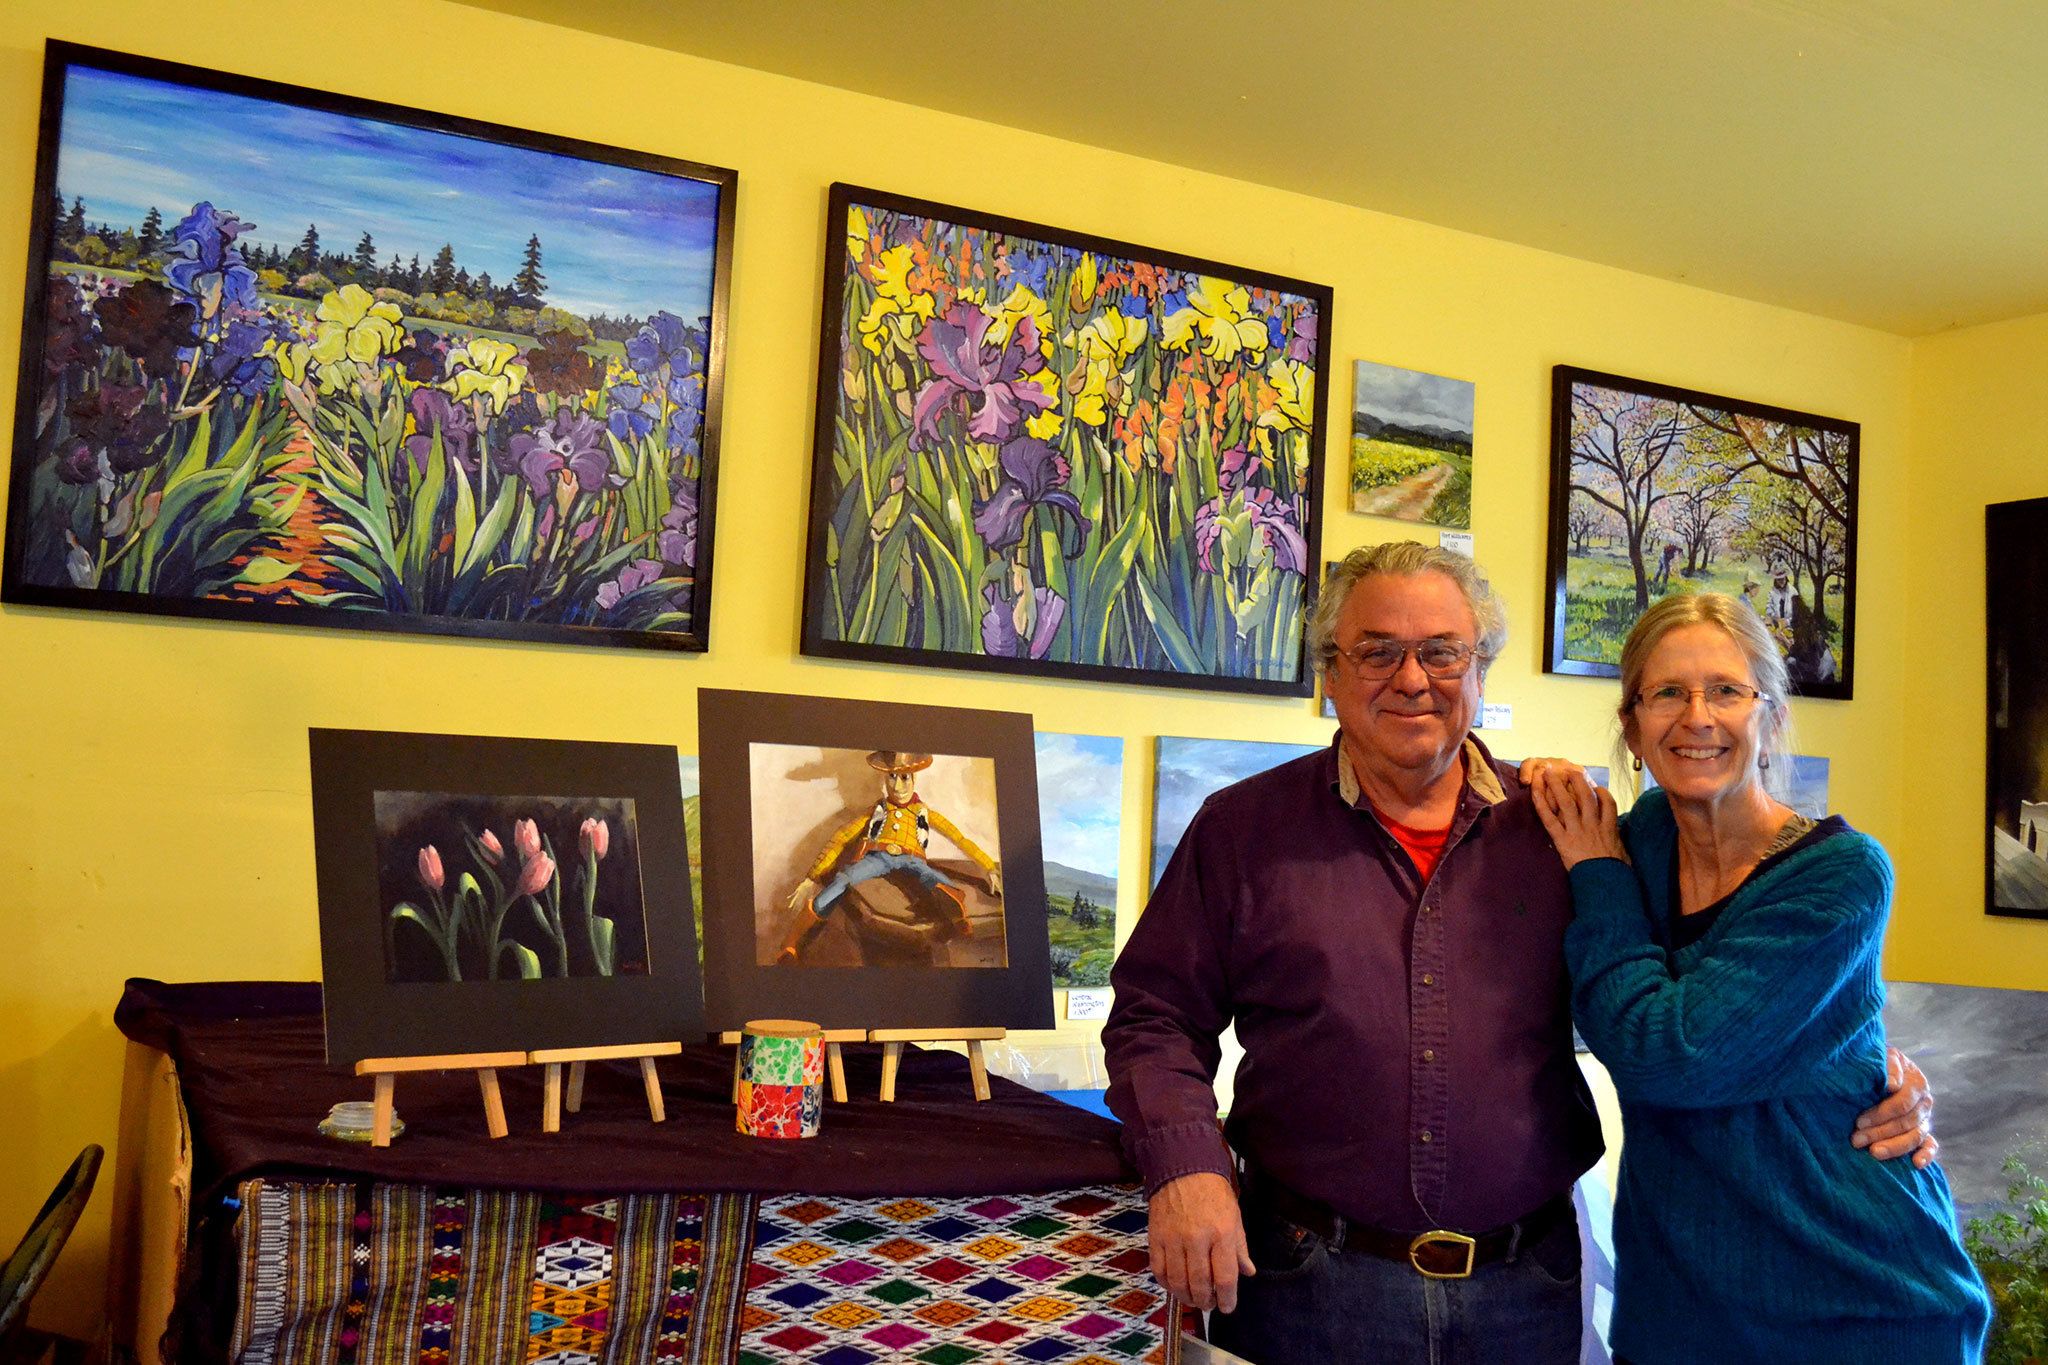 David Willis and Carrie Rodlend host “A Feast of Art” from 10 a.m.-4 p.m. Saturday, Dec. 10, at Rodlend’s studio, 562 Holgerson Road. The show features original paintings, wood boxes and more. Sequim Gazette photo by Matthew Nash